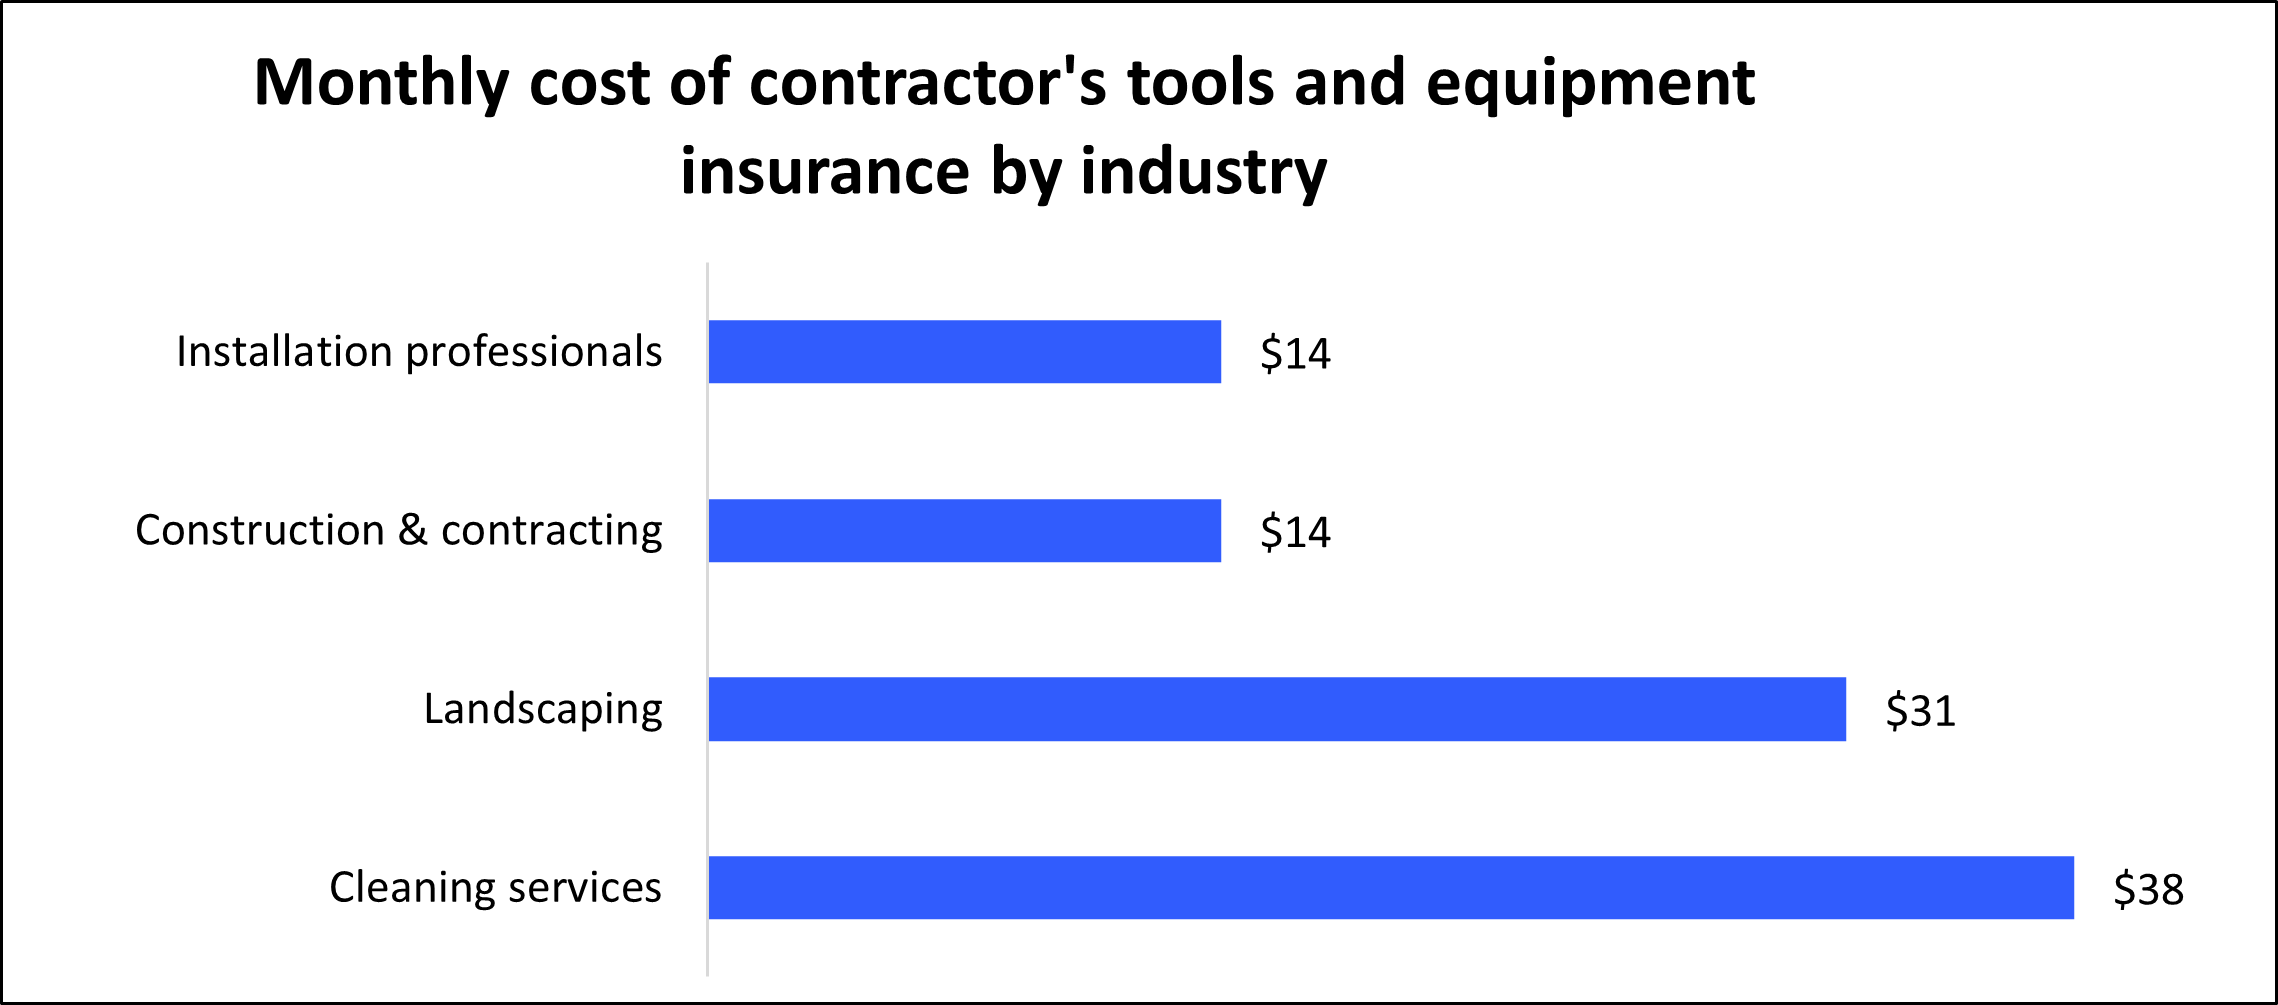 Monthly cost of contractor's tools and equipment insurance by industry